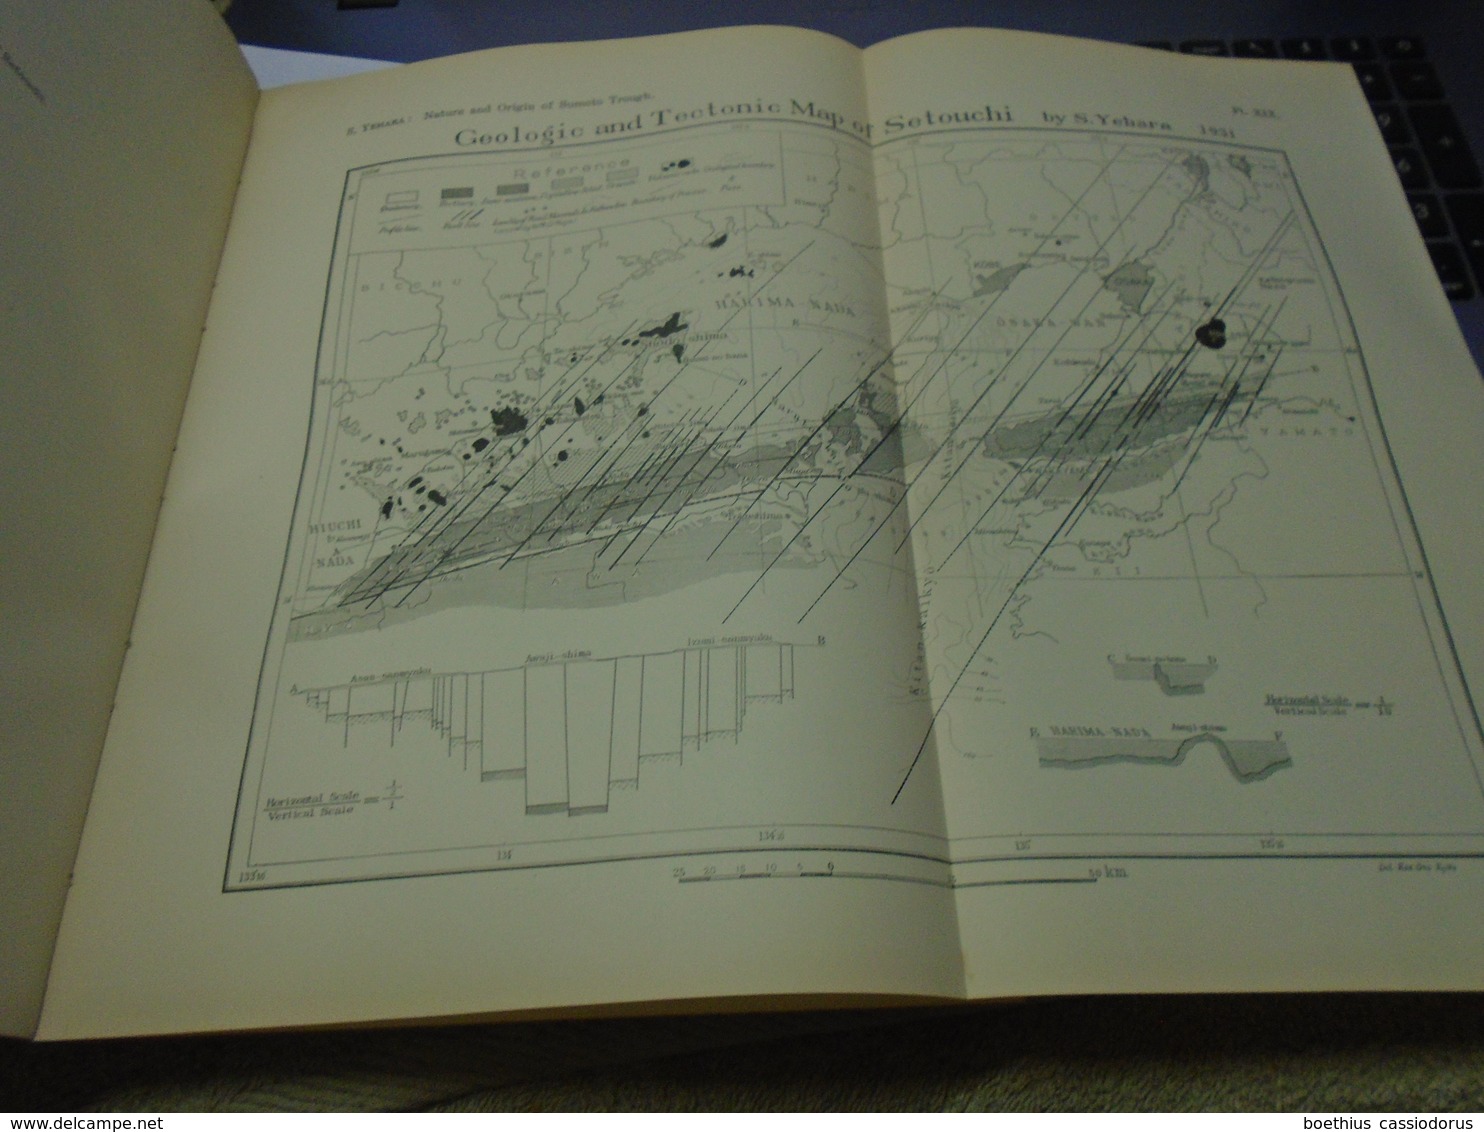 JAPANESE JOURNAL OF GEOLOGY AND GEOGRAPHY Transactions And Abstracts Vol. IX  Nos. 3 And 4 TOKYO March,1932 - Earth Science